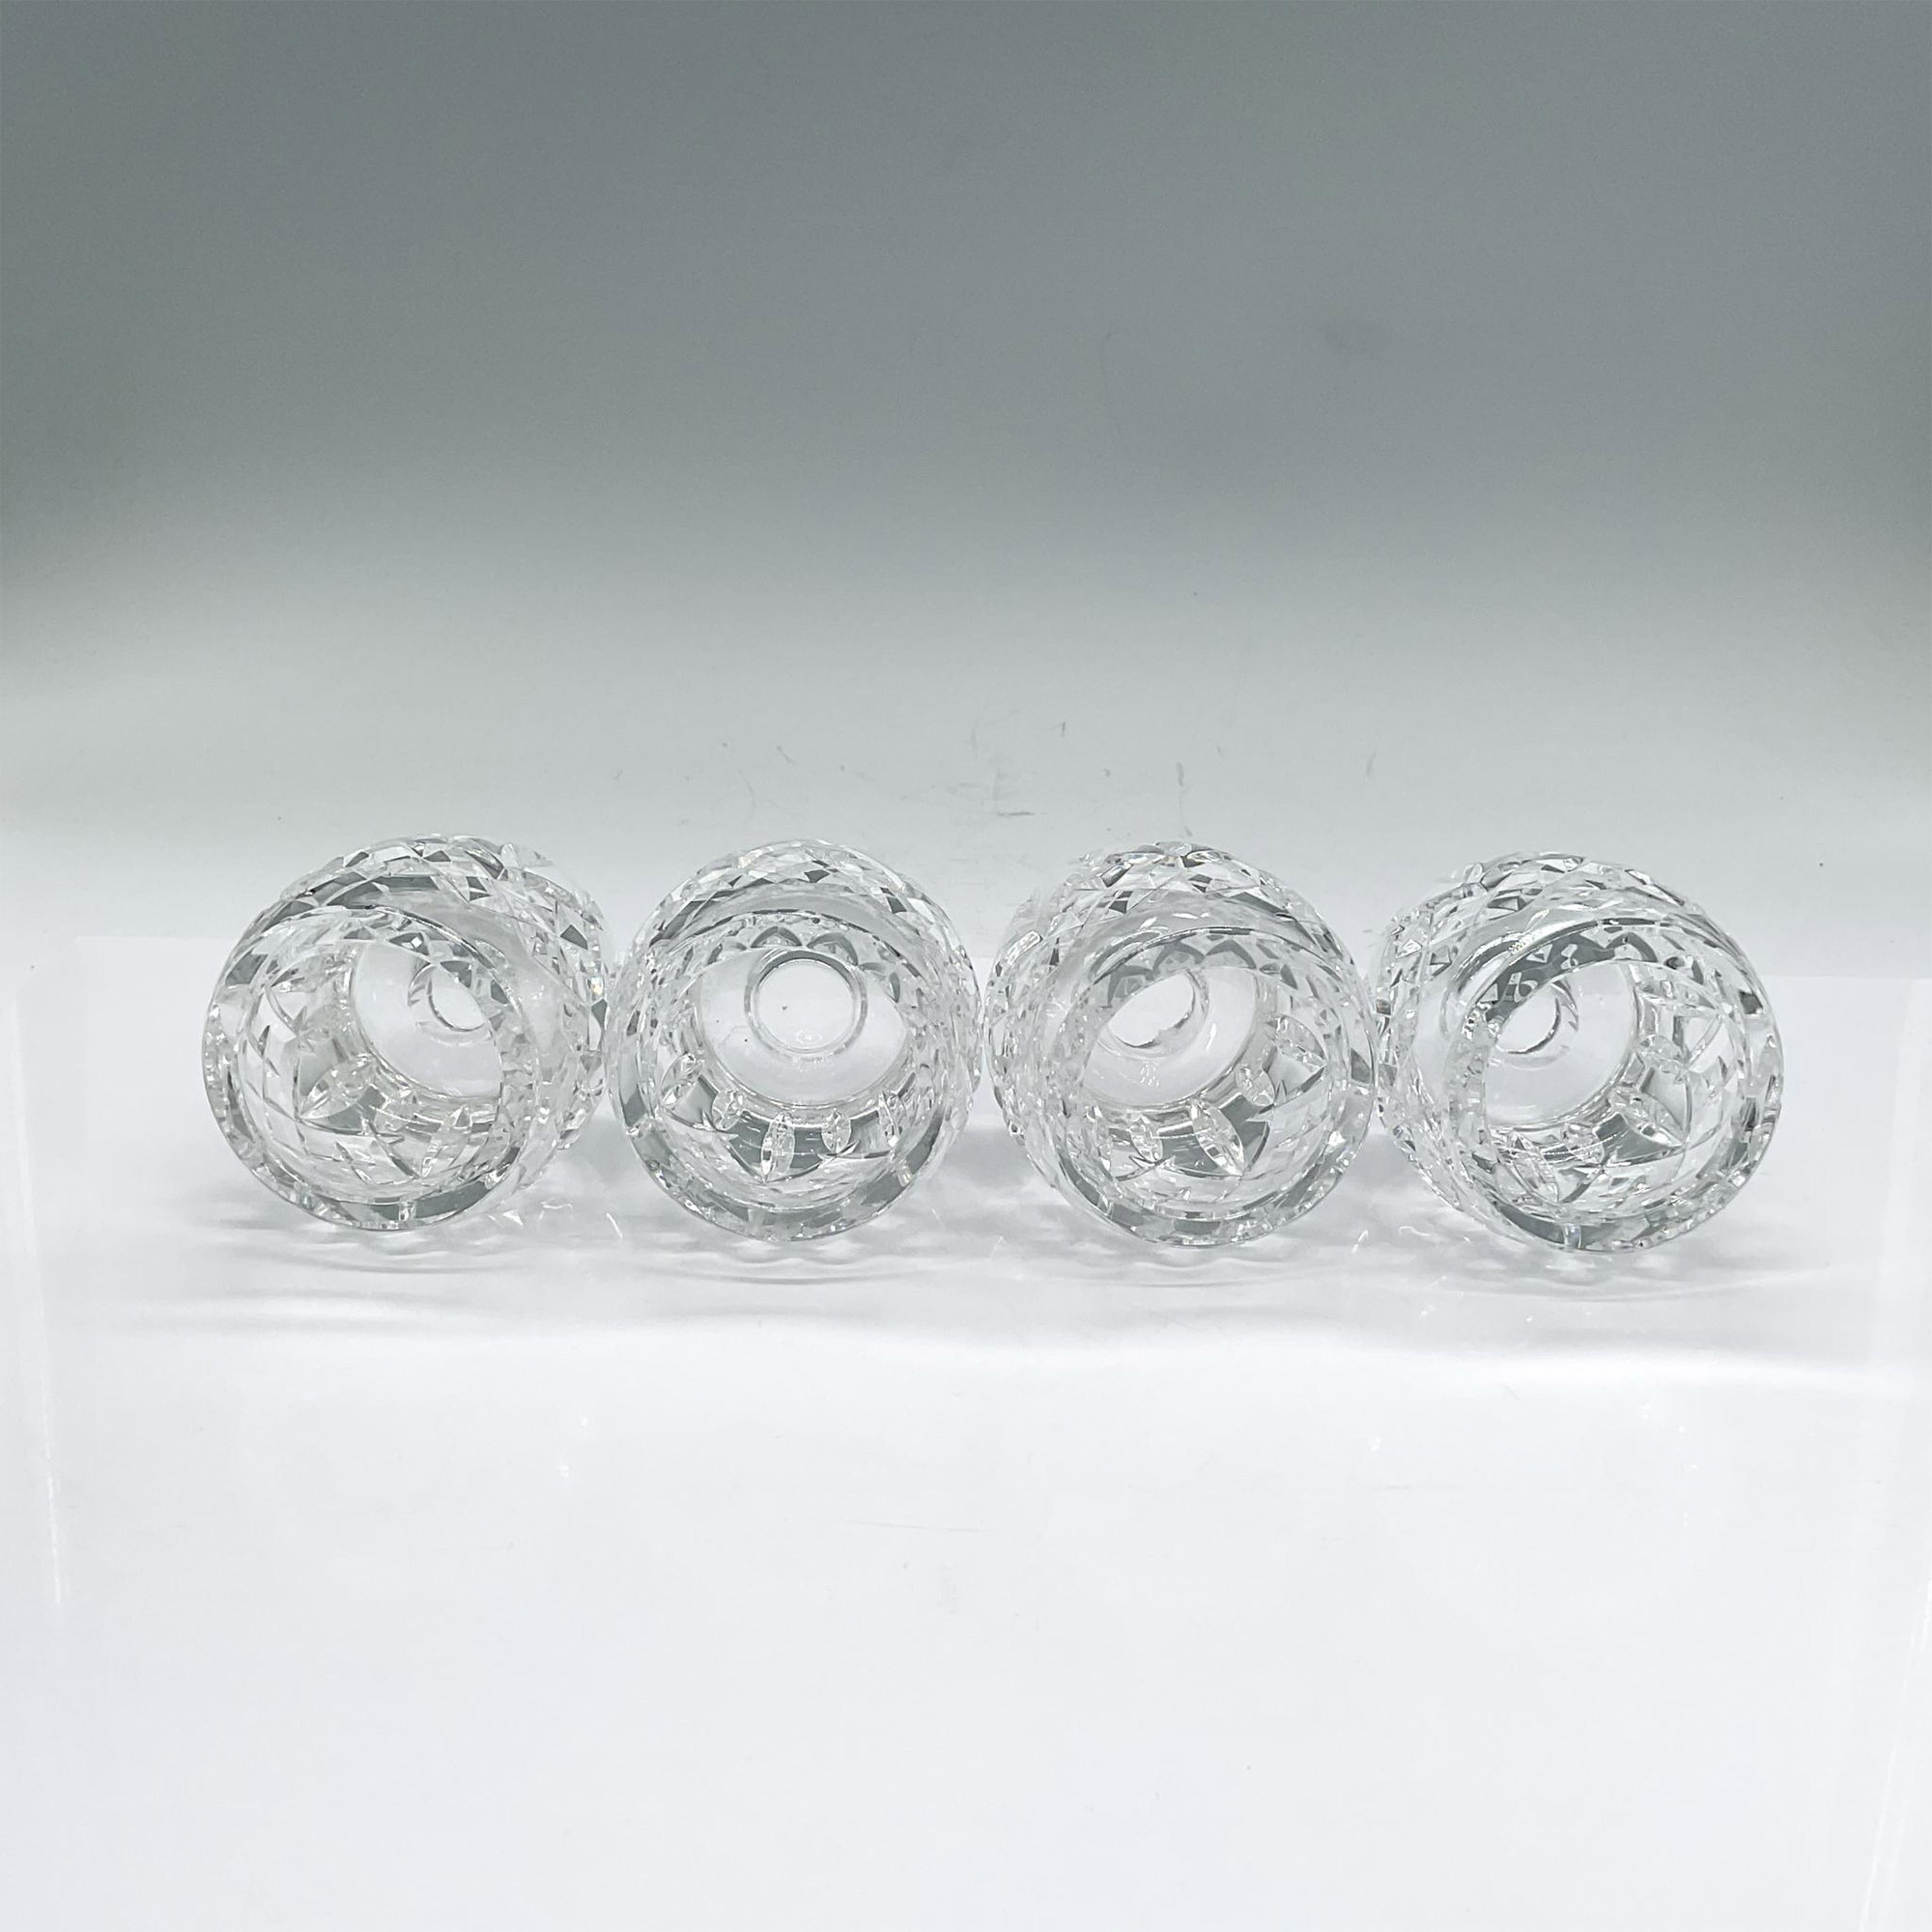 4pc Waterford Crystal Candlesticks, Lismore - Image 3 of 3